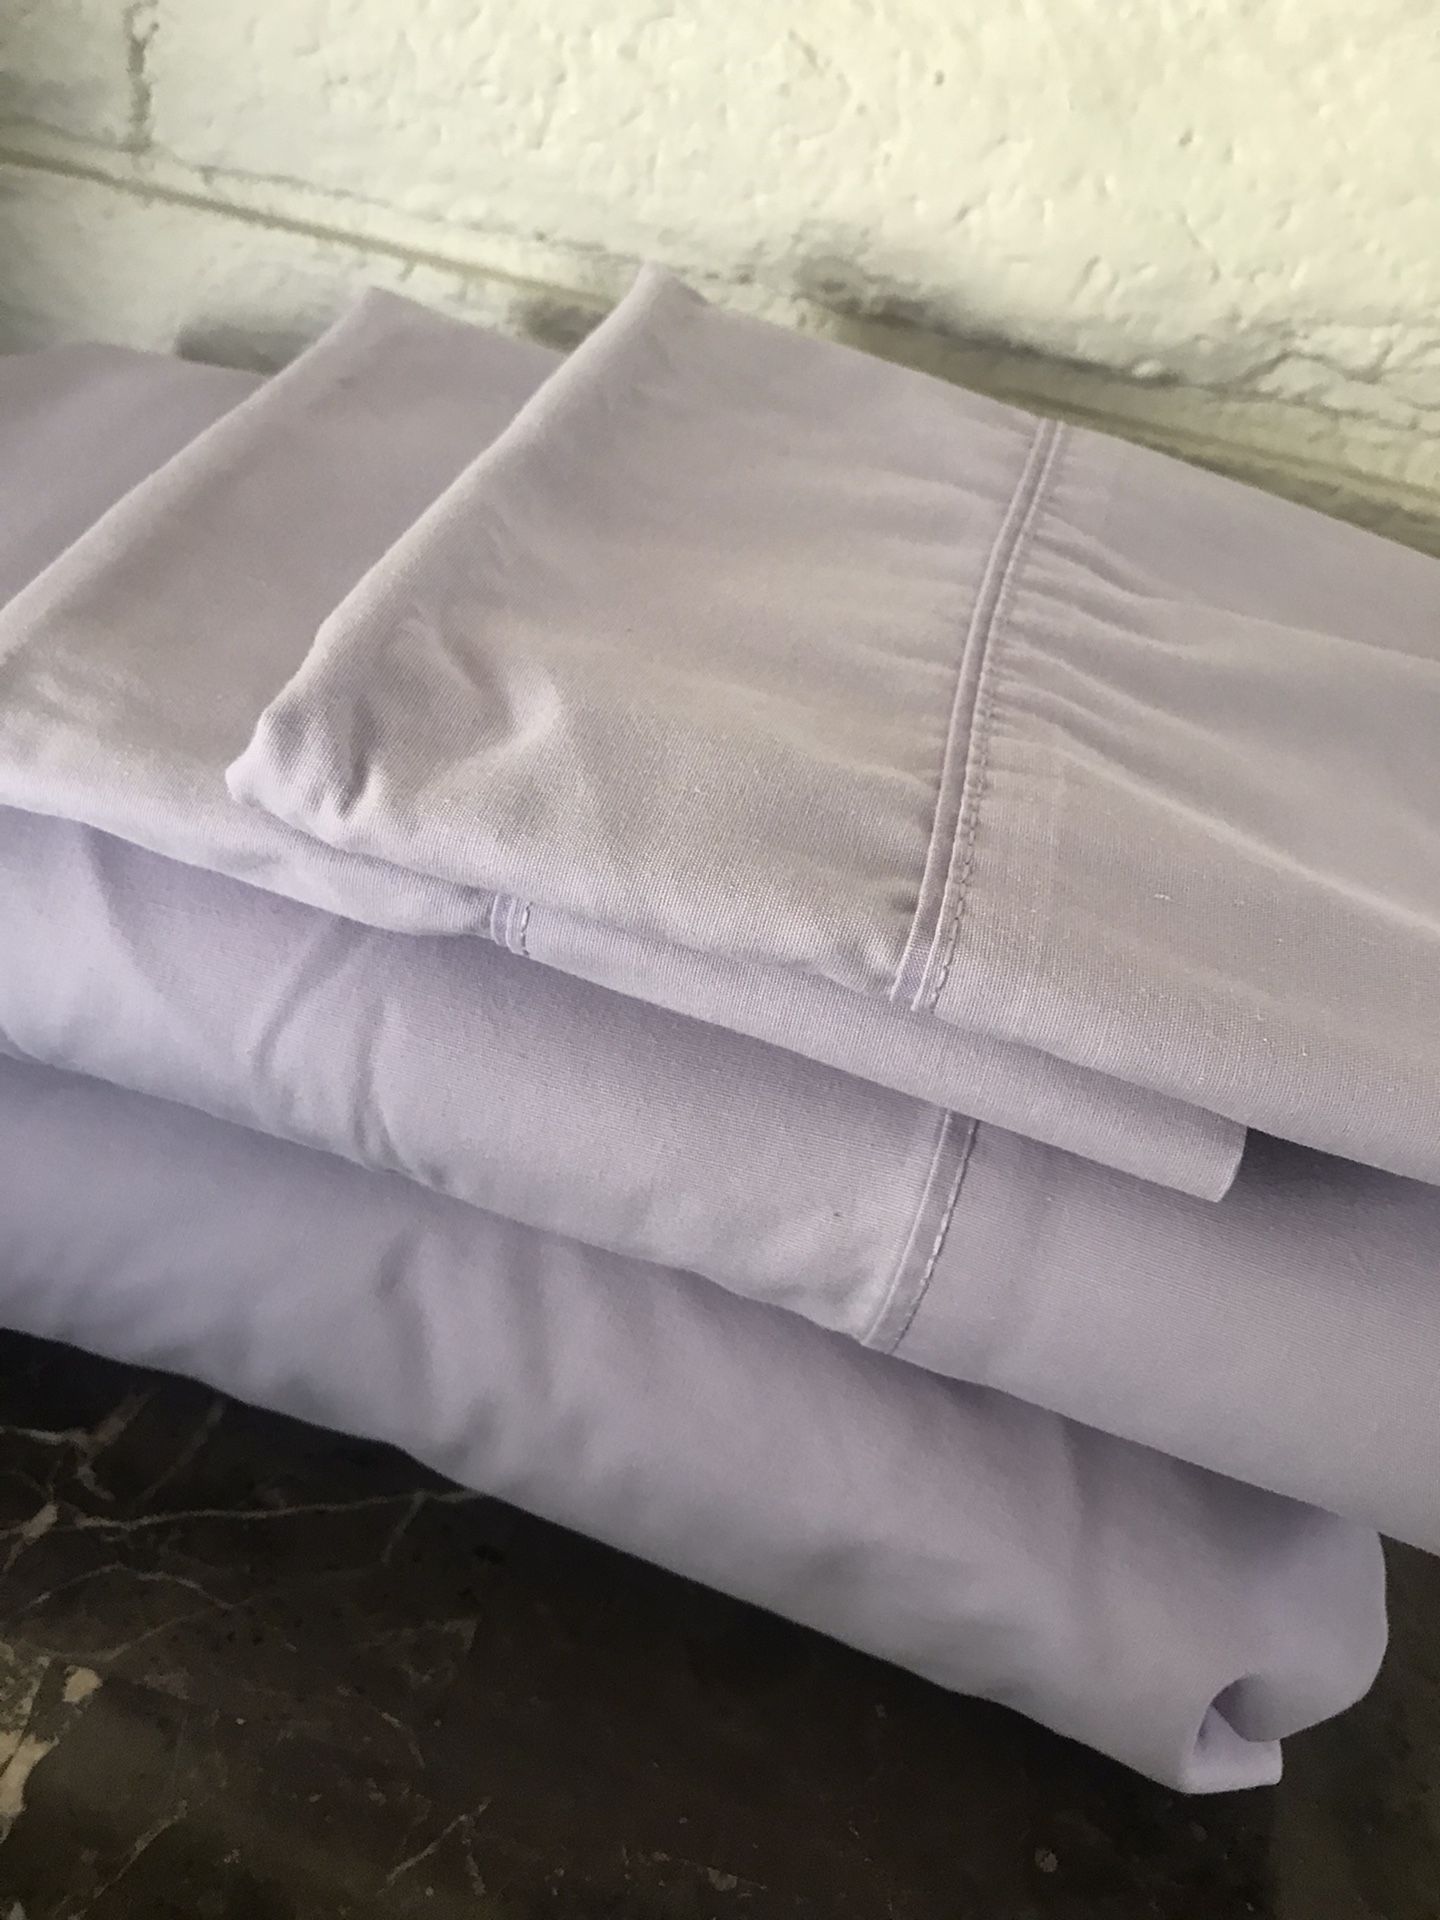 Purple Queen Sheets - Fitted, Flat, Pillow cases 2